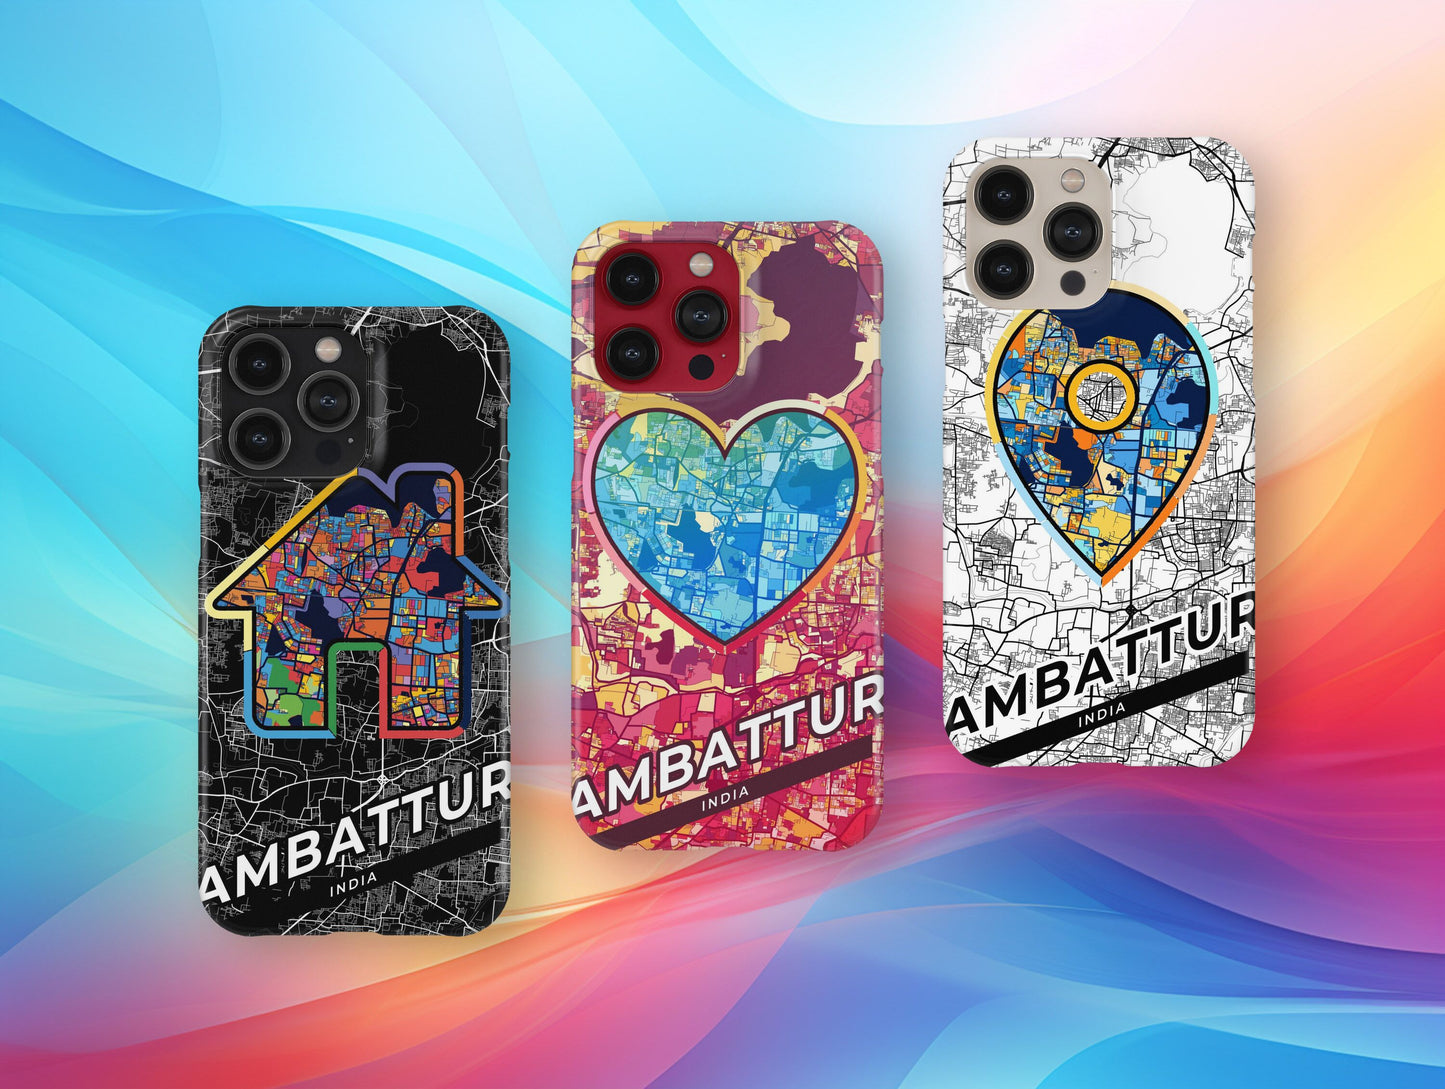 Ambattur India slim phone case with colorful icon. Birthday, wedding or housewarming gift. Couple match cases.